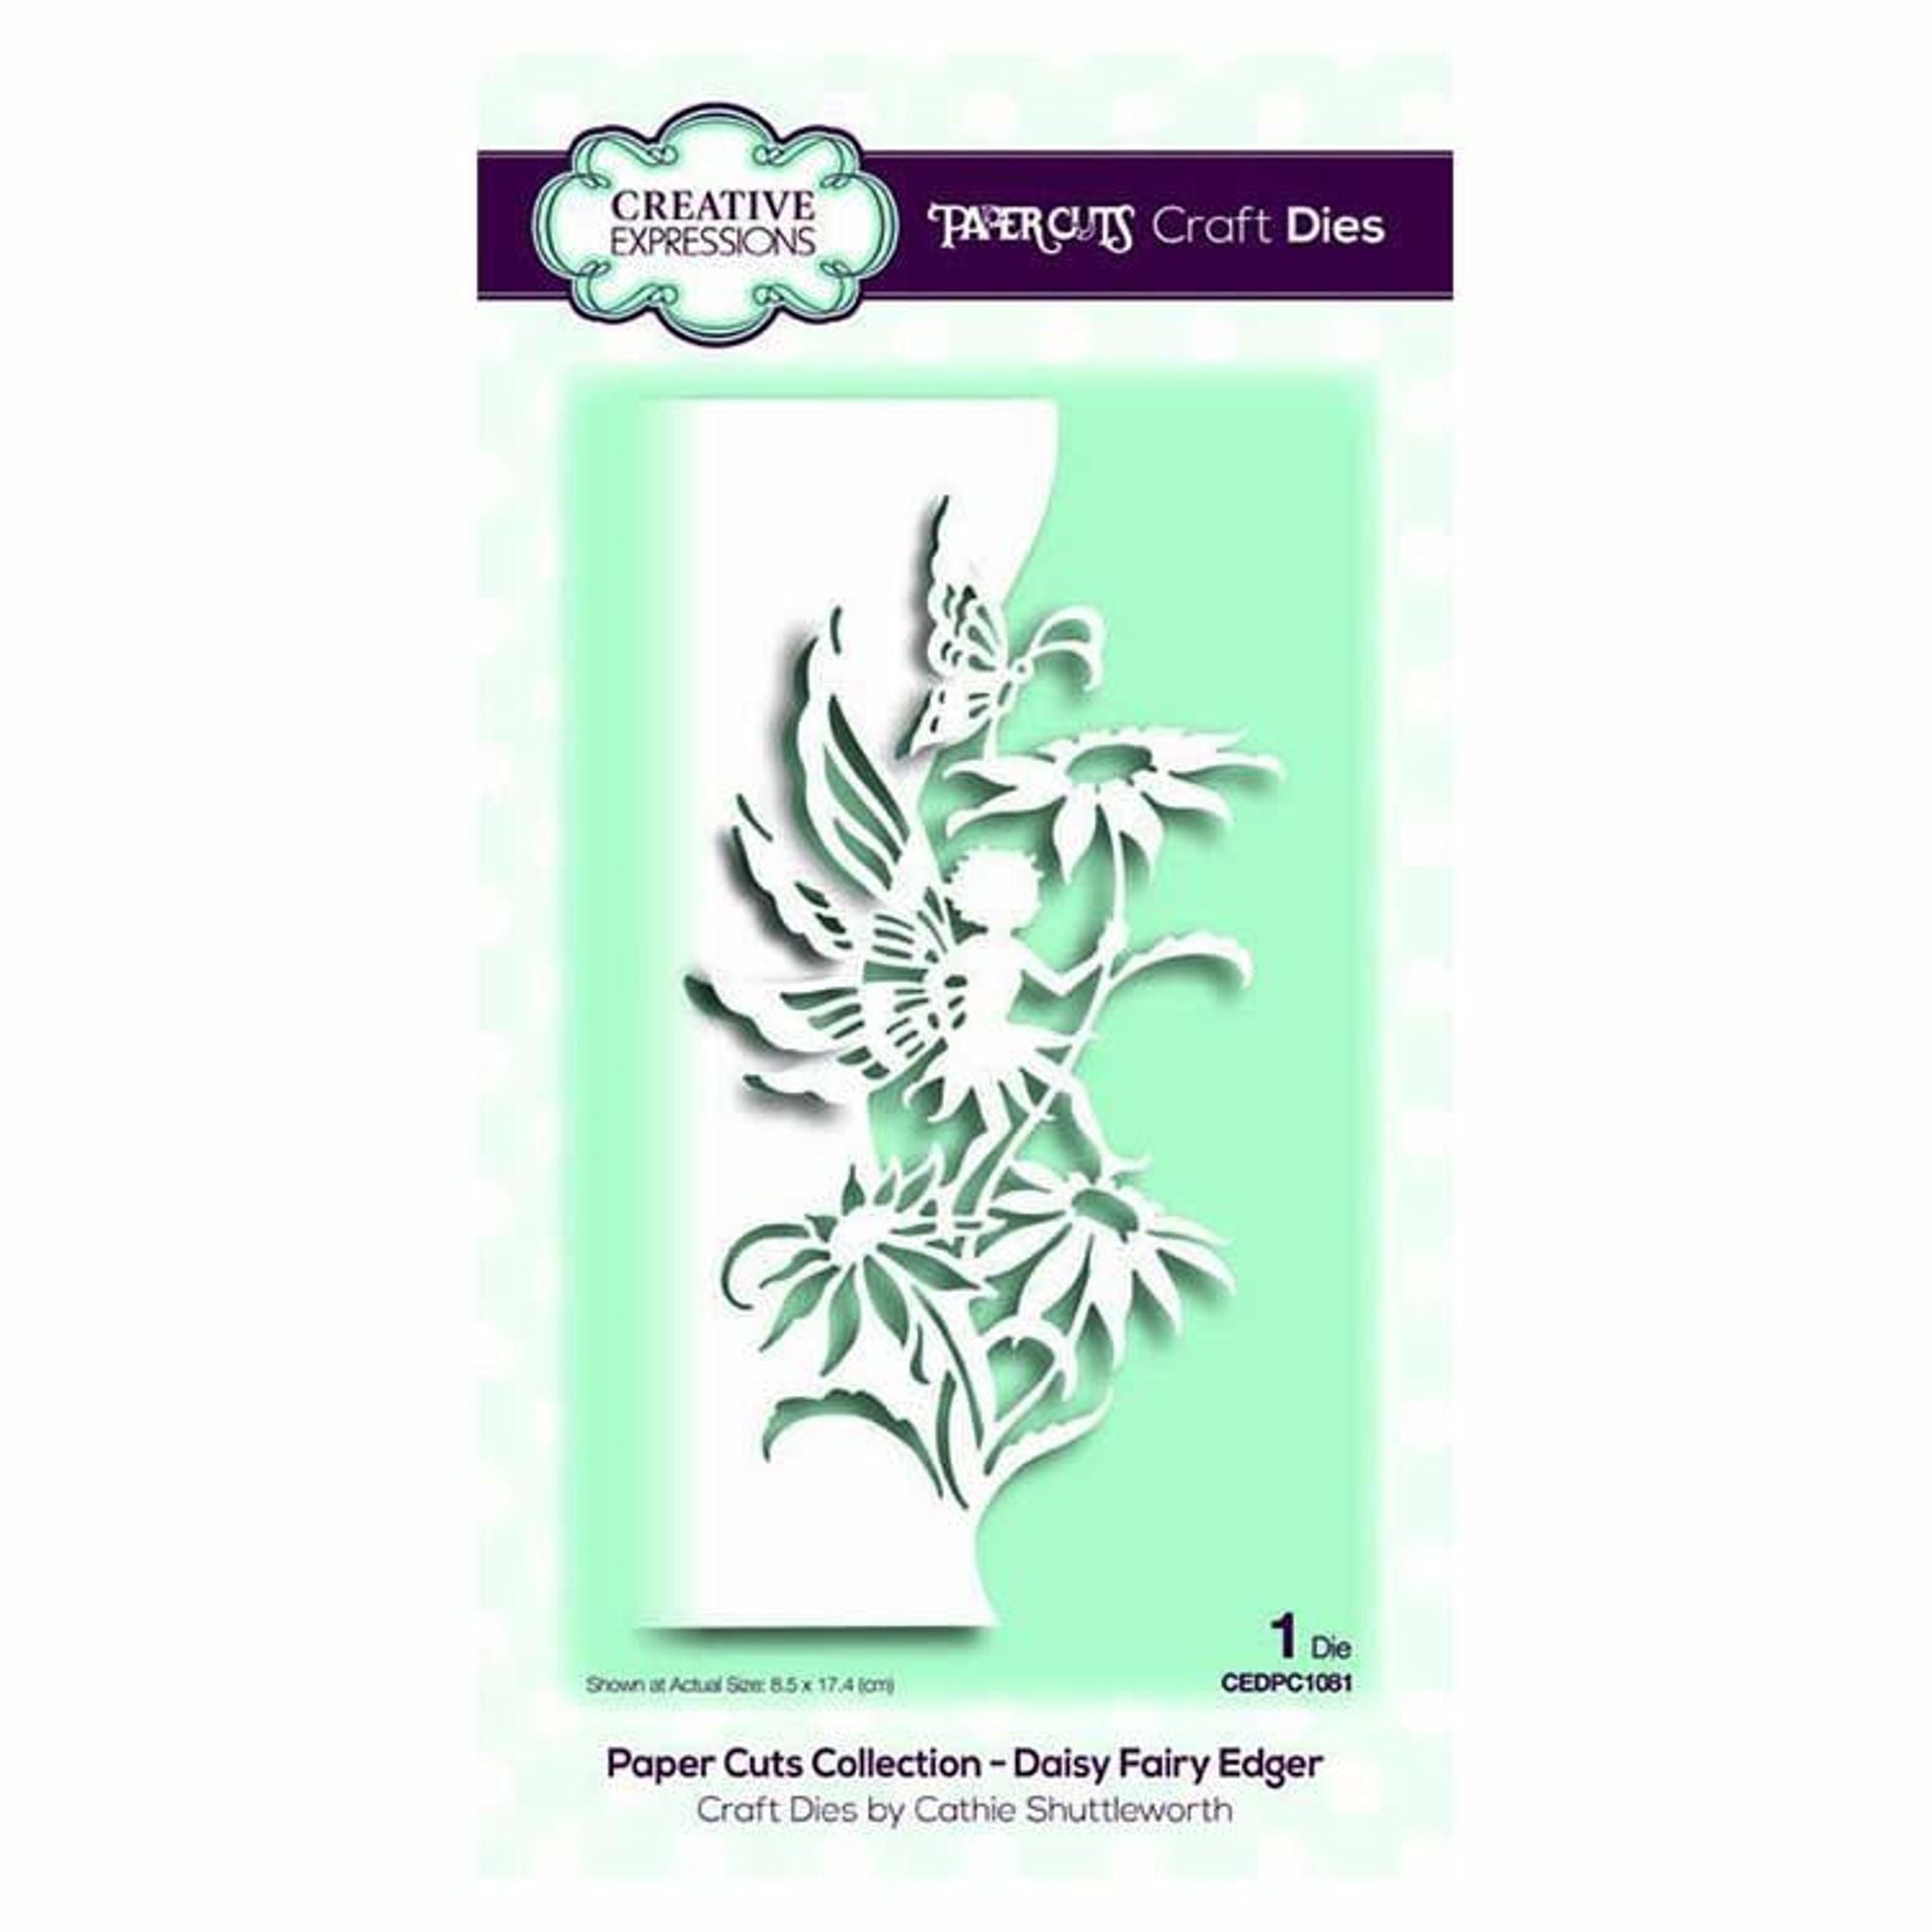 Creative Expressions Paper Cuts Collection - Daisy Fairy Edger